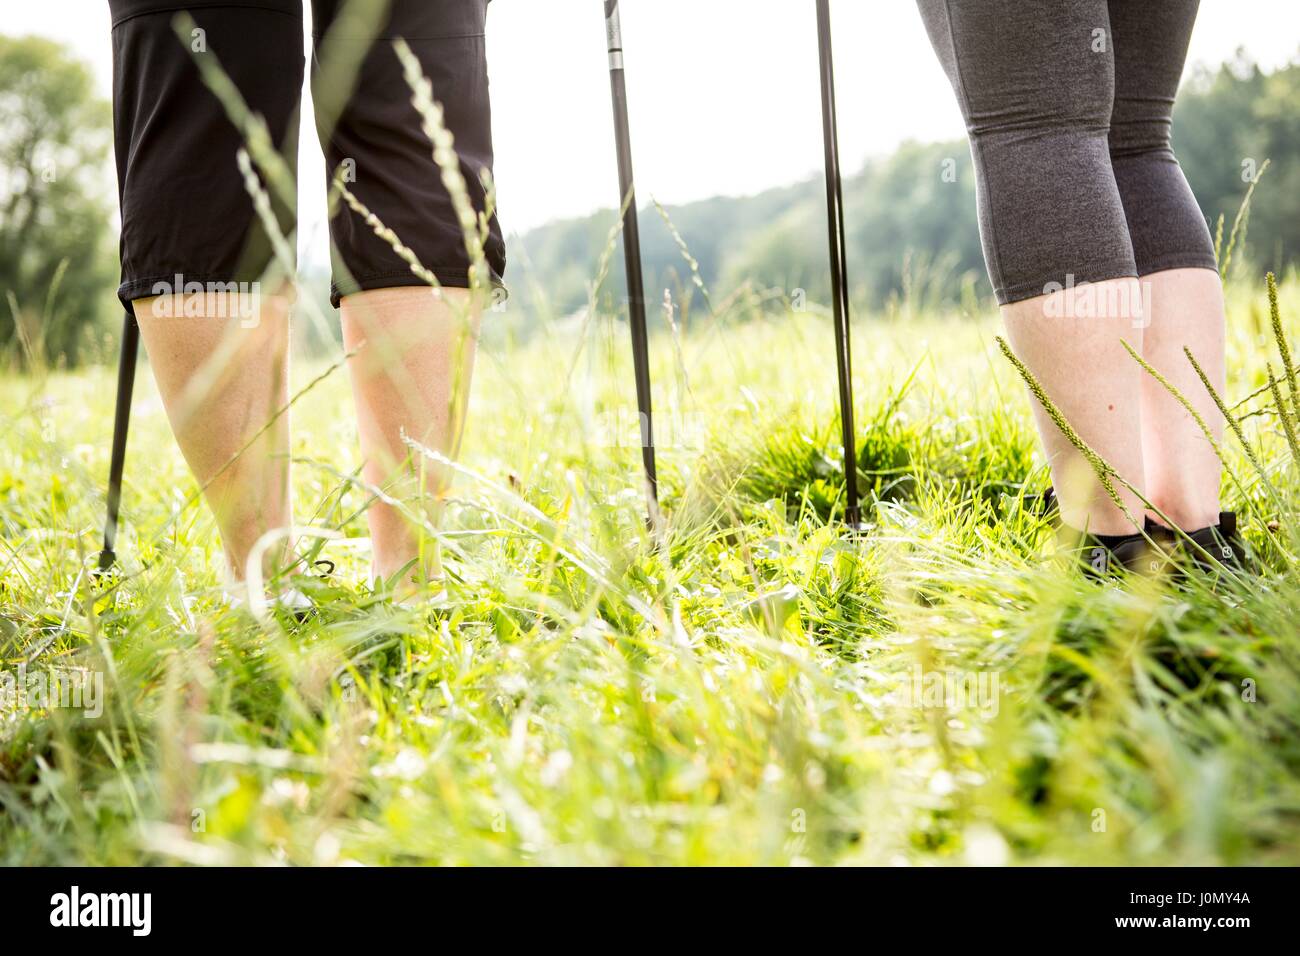 Two people with walking poles. Stock Photo